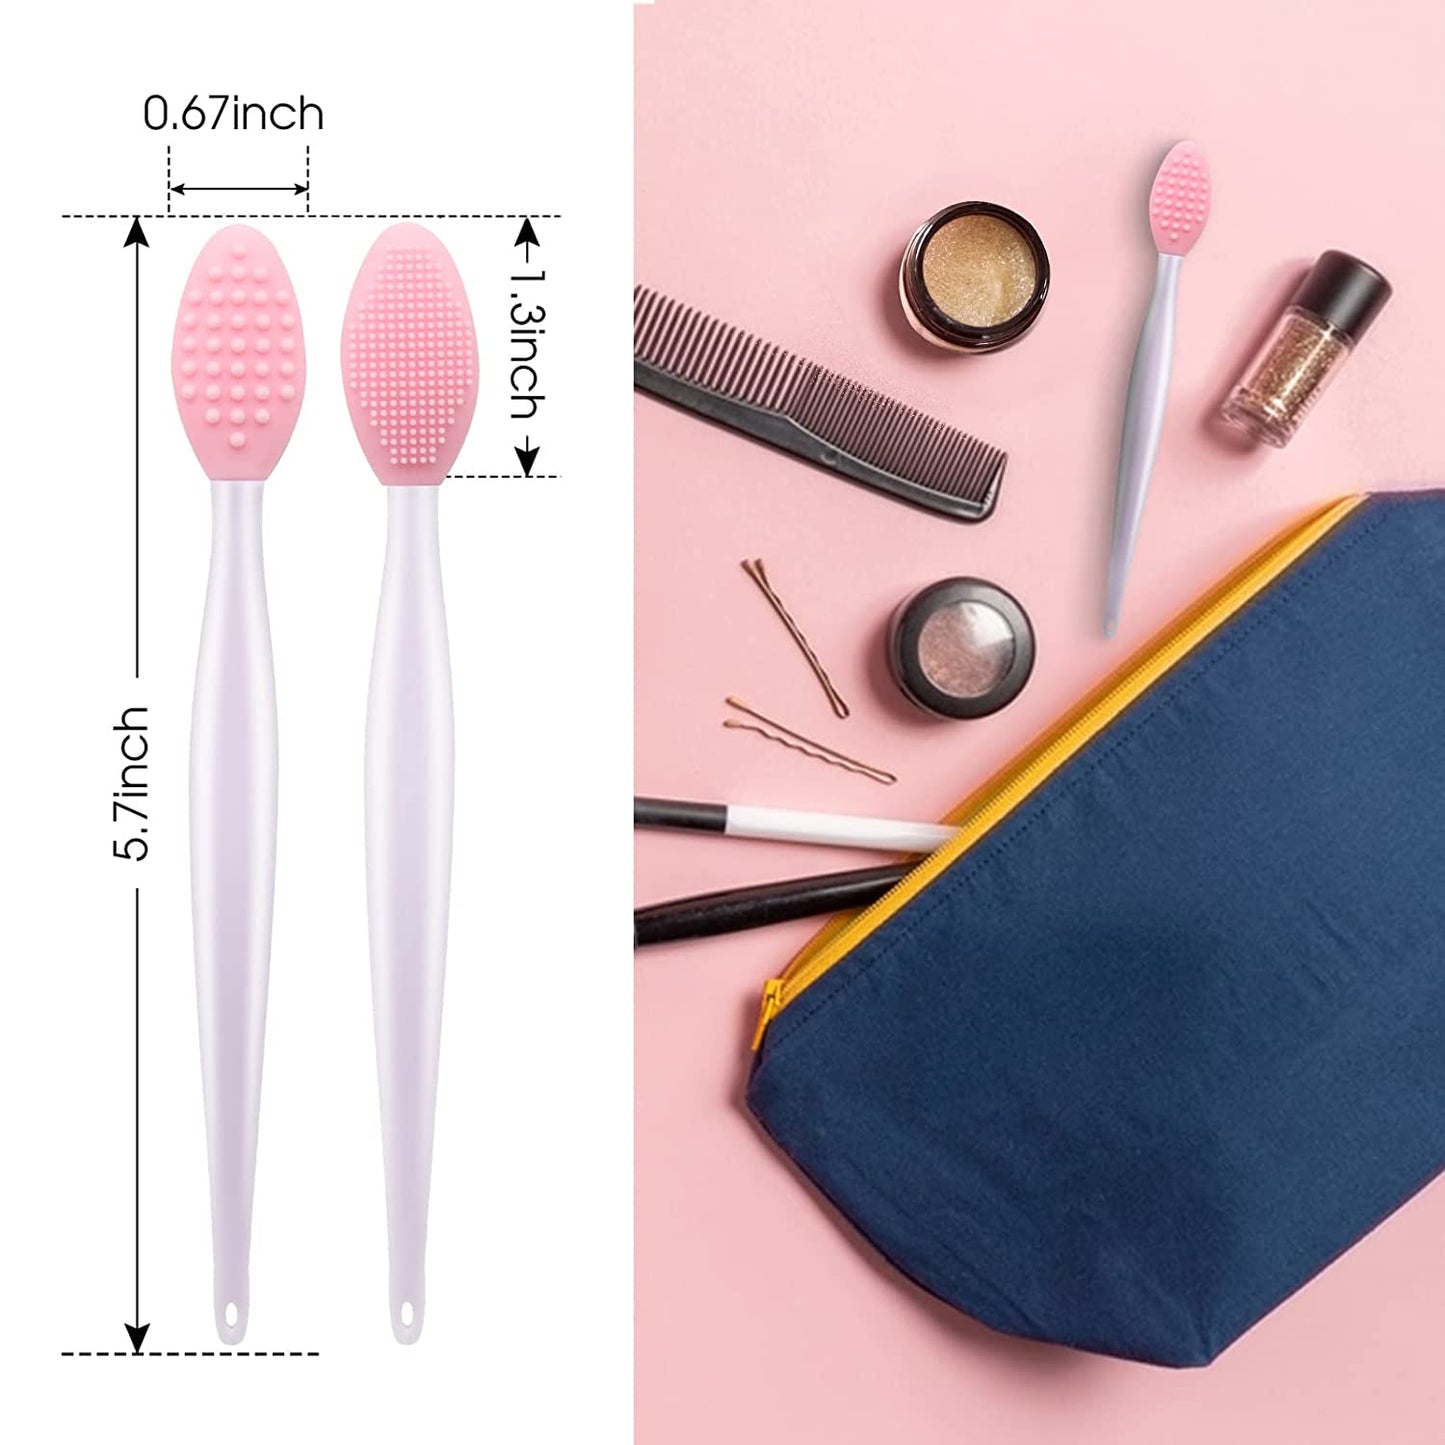 Lip Scrub Brush Lip Brush Tool,Double-Sided Silicone Exfoliating Lip Brush,Gentle Lip Exfoliator Scrubber Brush for Smooth,Soft,Bright,and Healthy Lips(2 PCS)